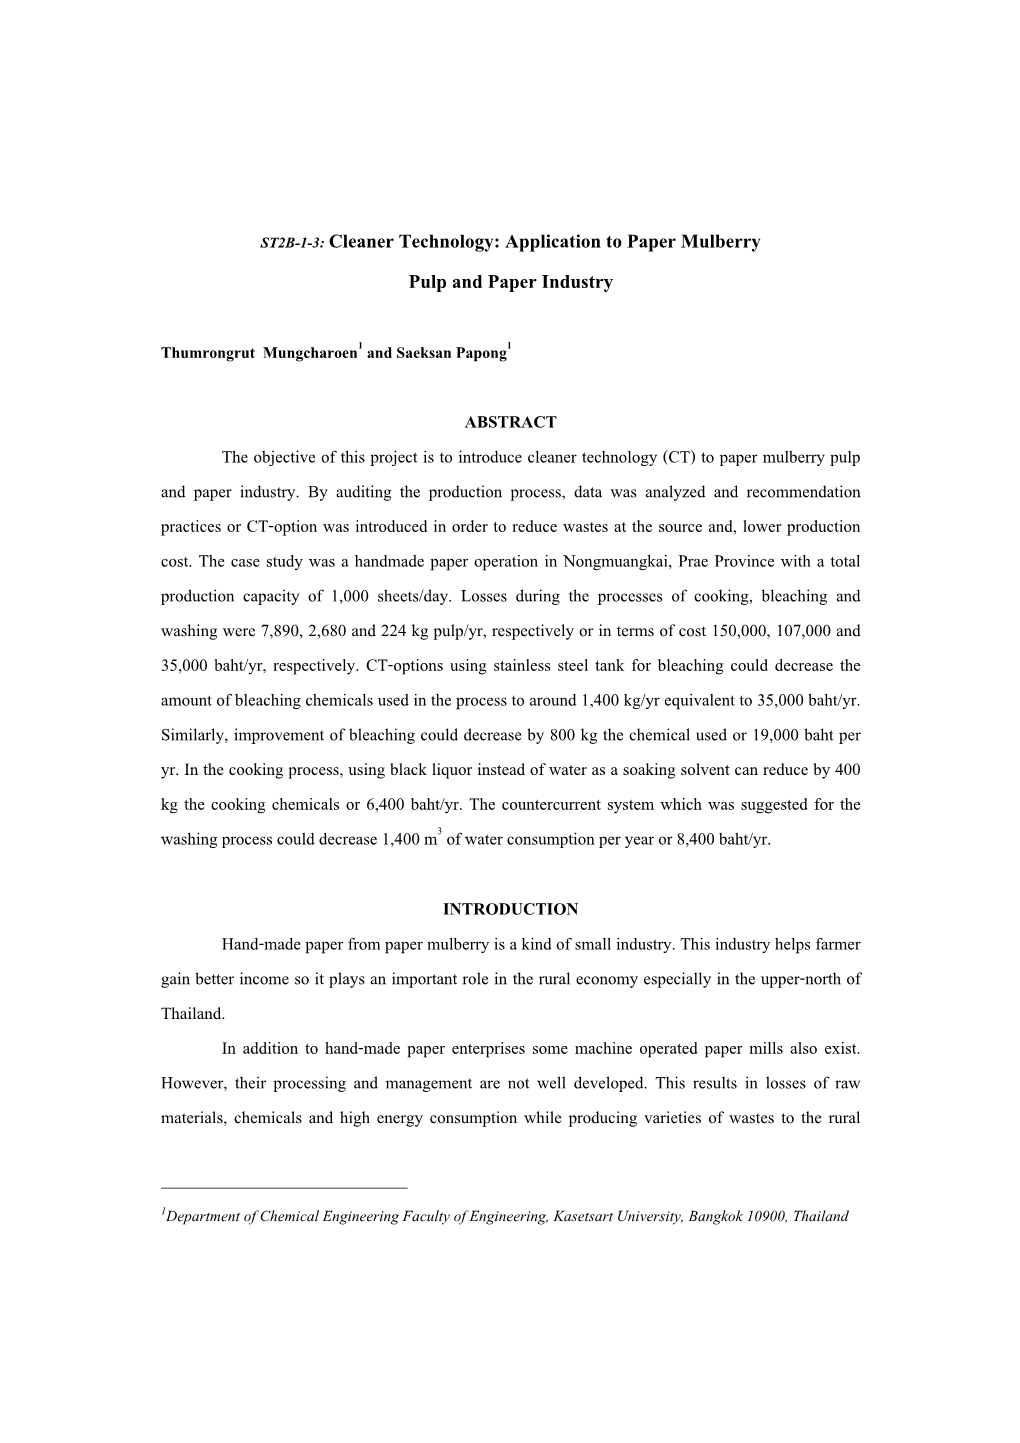 ST2B-1-3: Cleaner Technology: Application to Paper Mulberry Pulp and Paper Industry